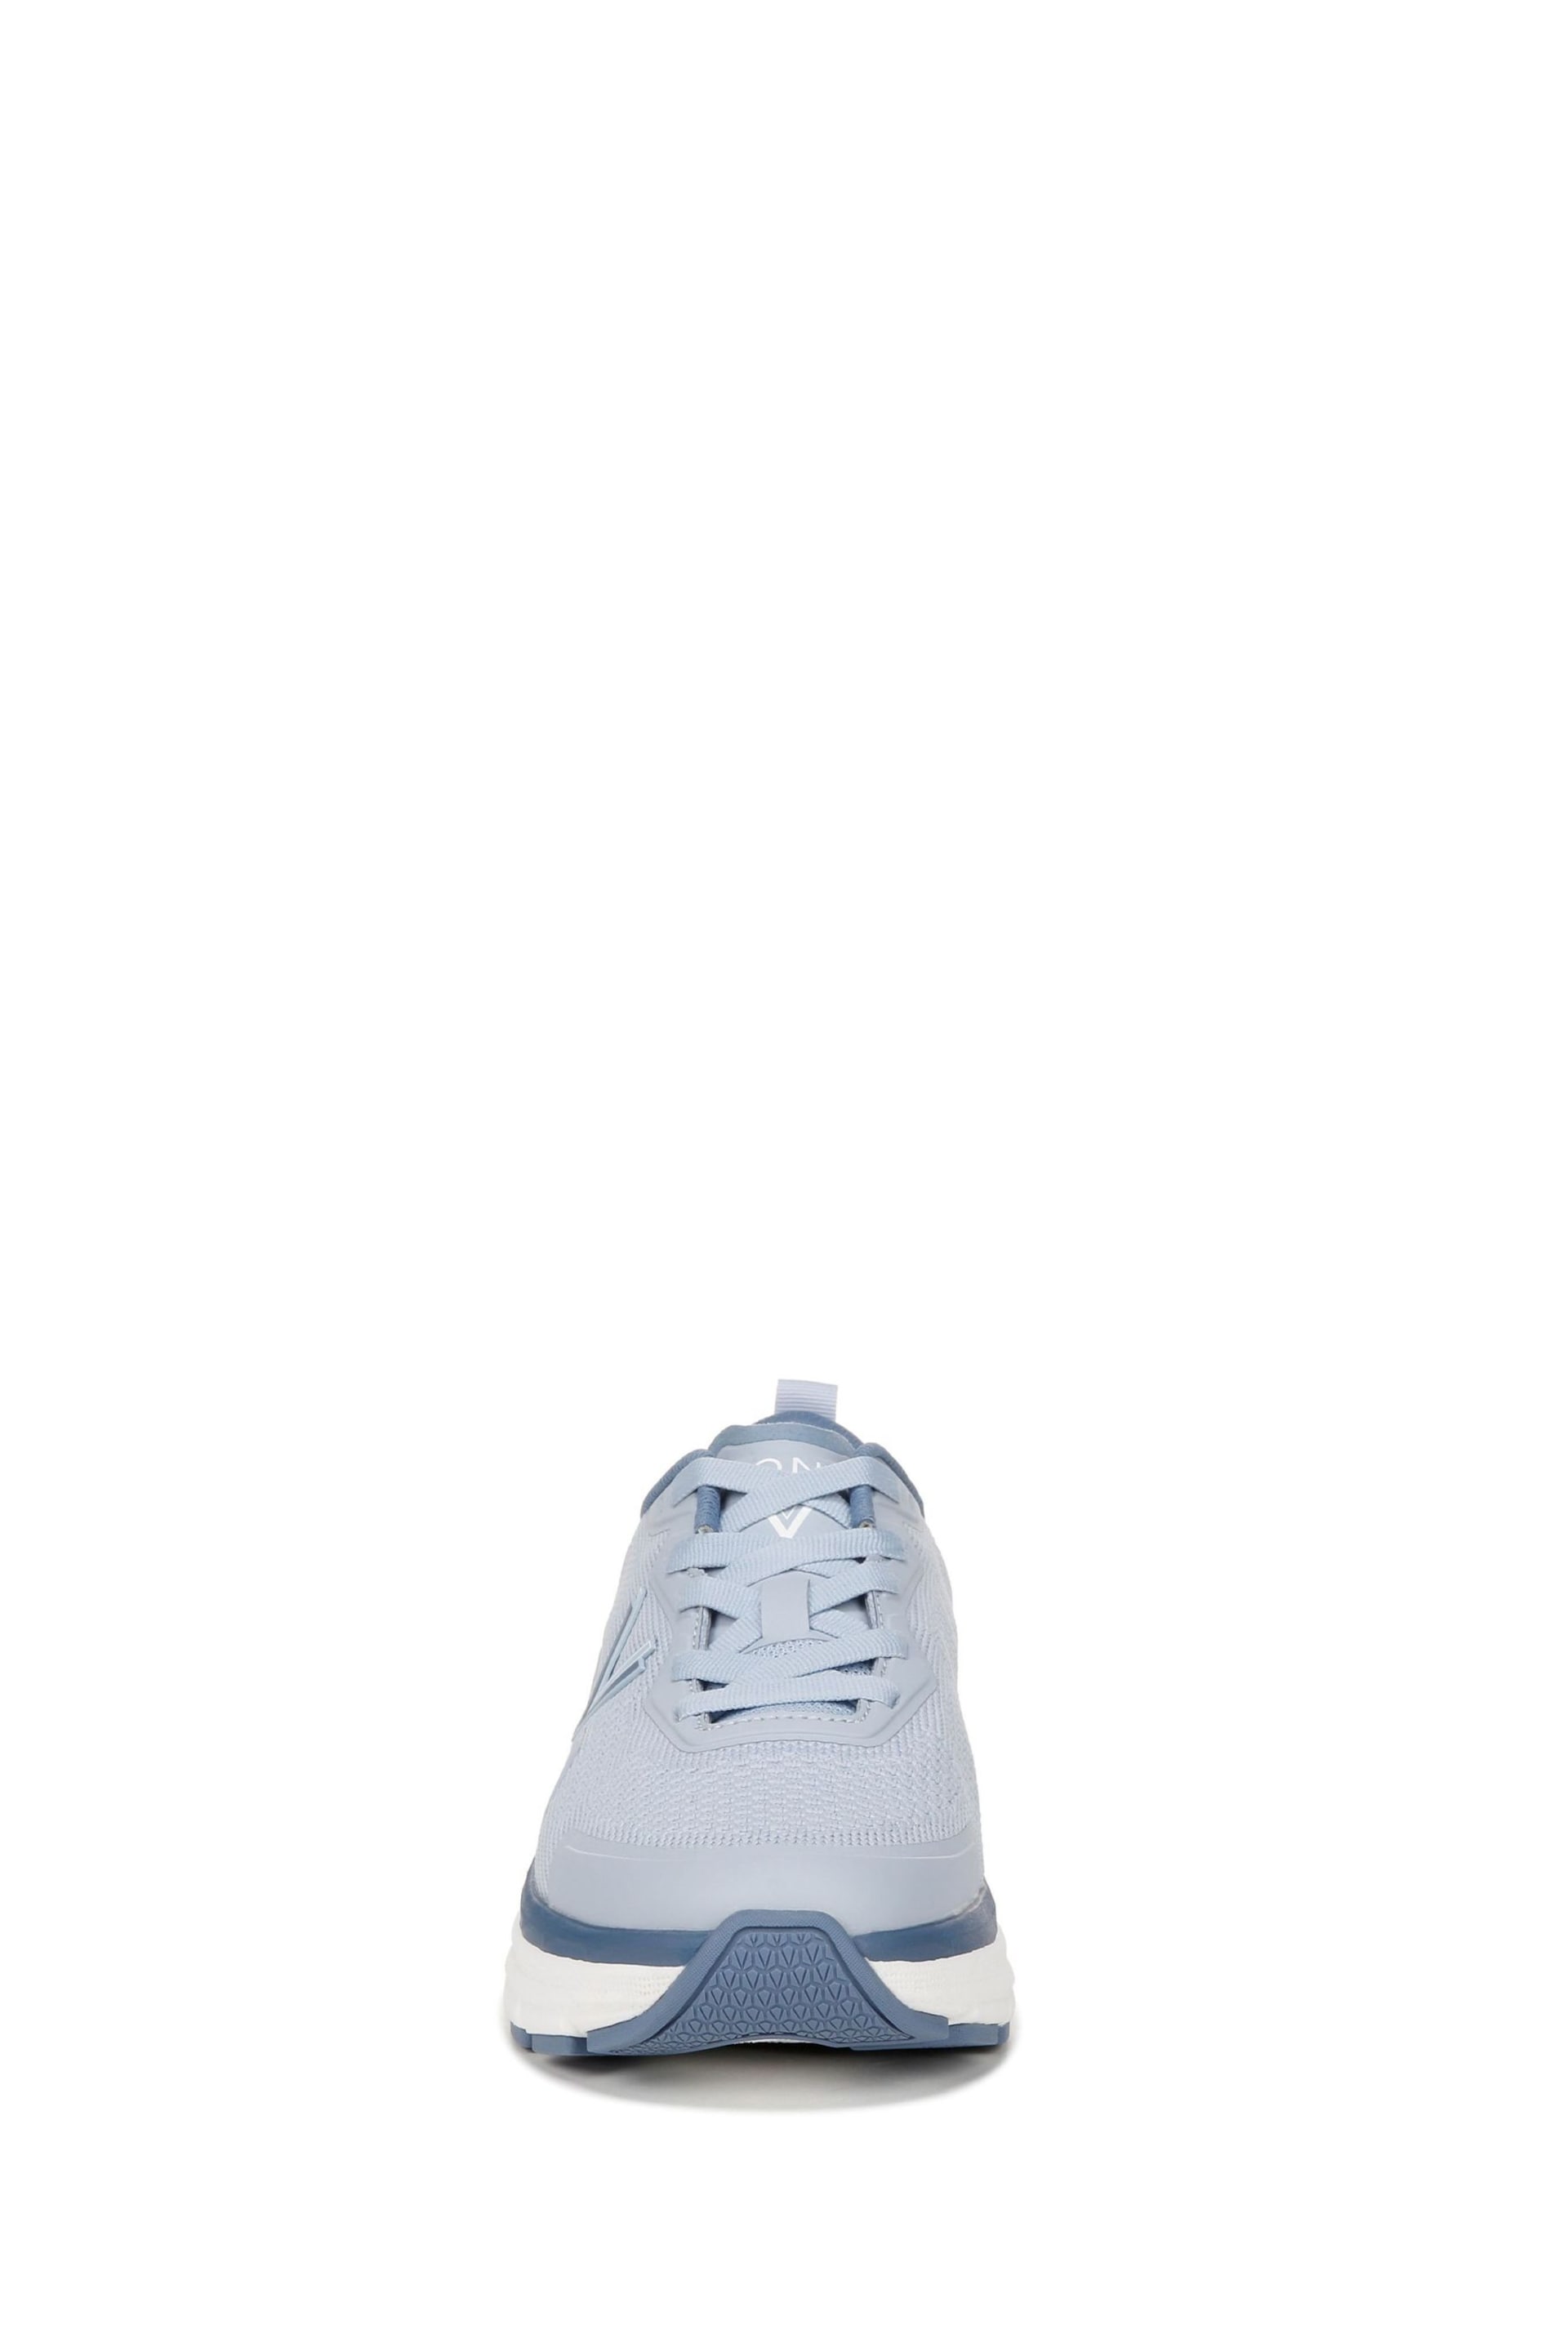 Vionic Walk Max Wide Fit Trainers - Image 4 of 7